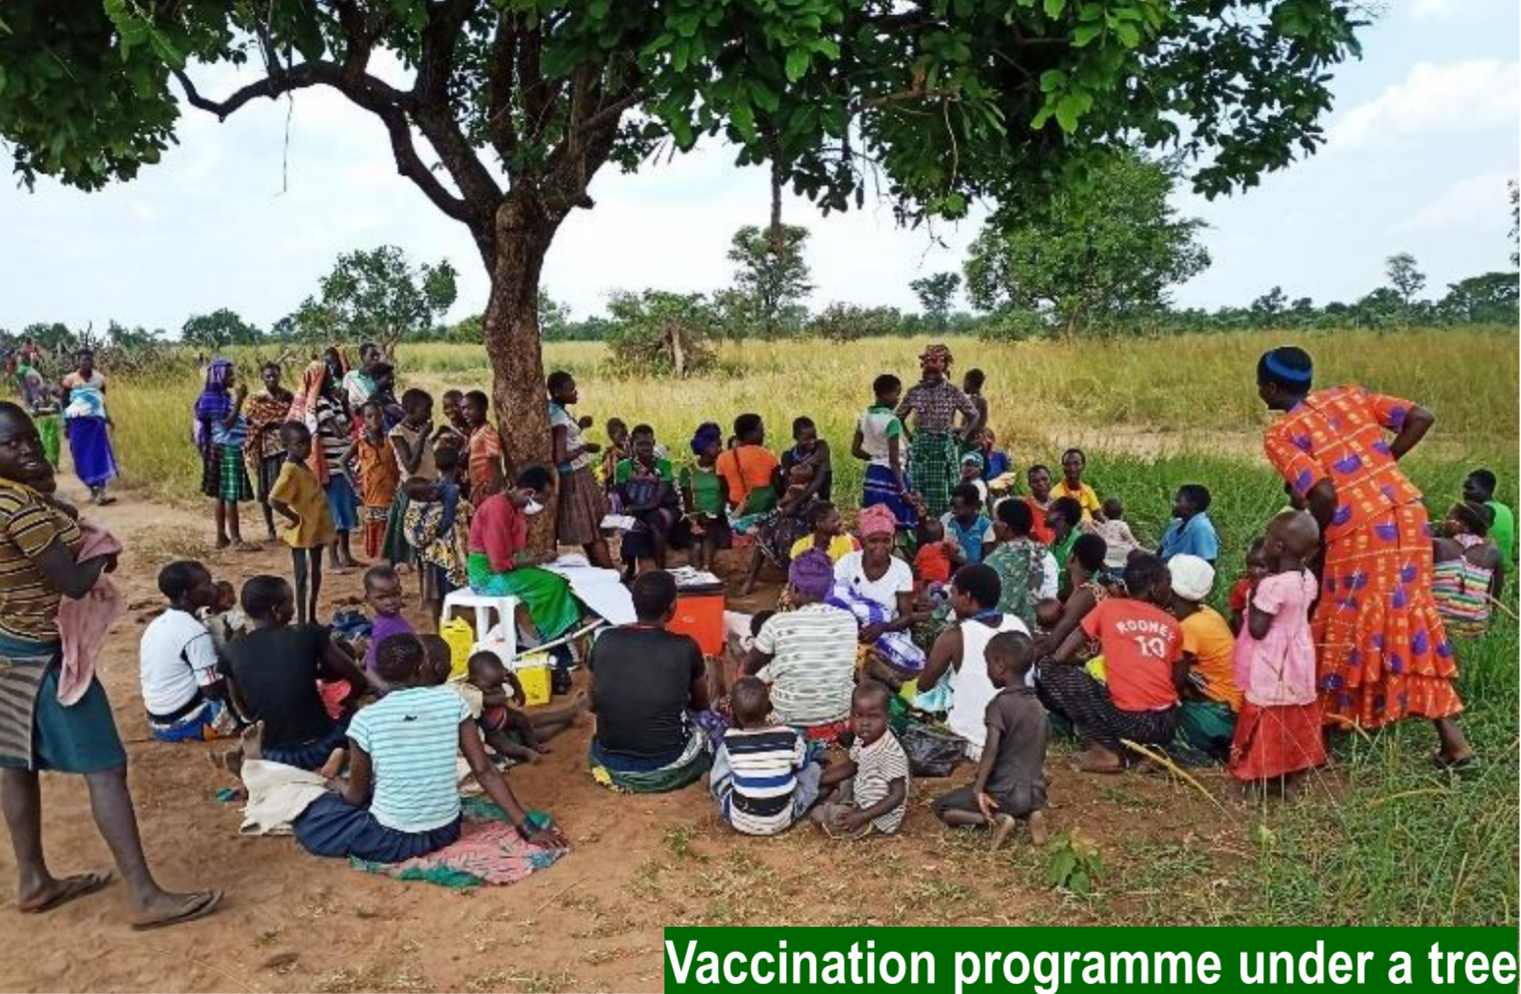 a community sits under a large mango tree to receive vaccinations